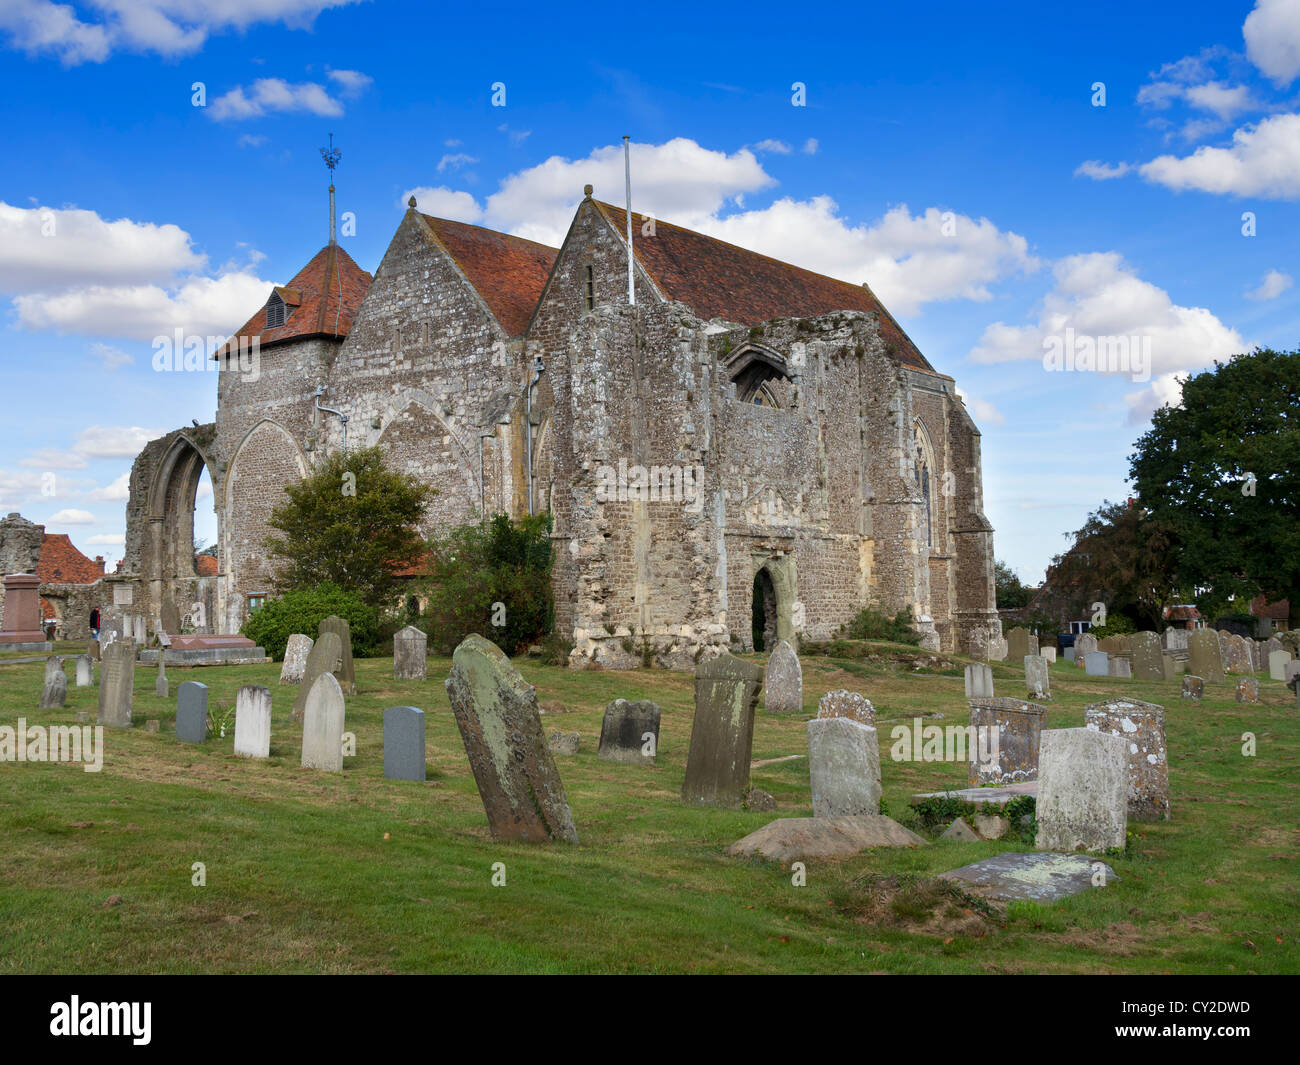 Church of St Thomas the Martyr at Winchelsea, Sussex. Stock Photo